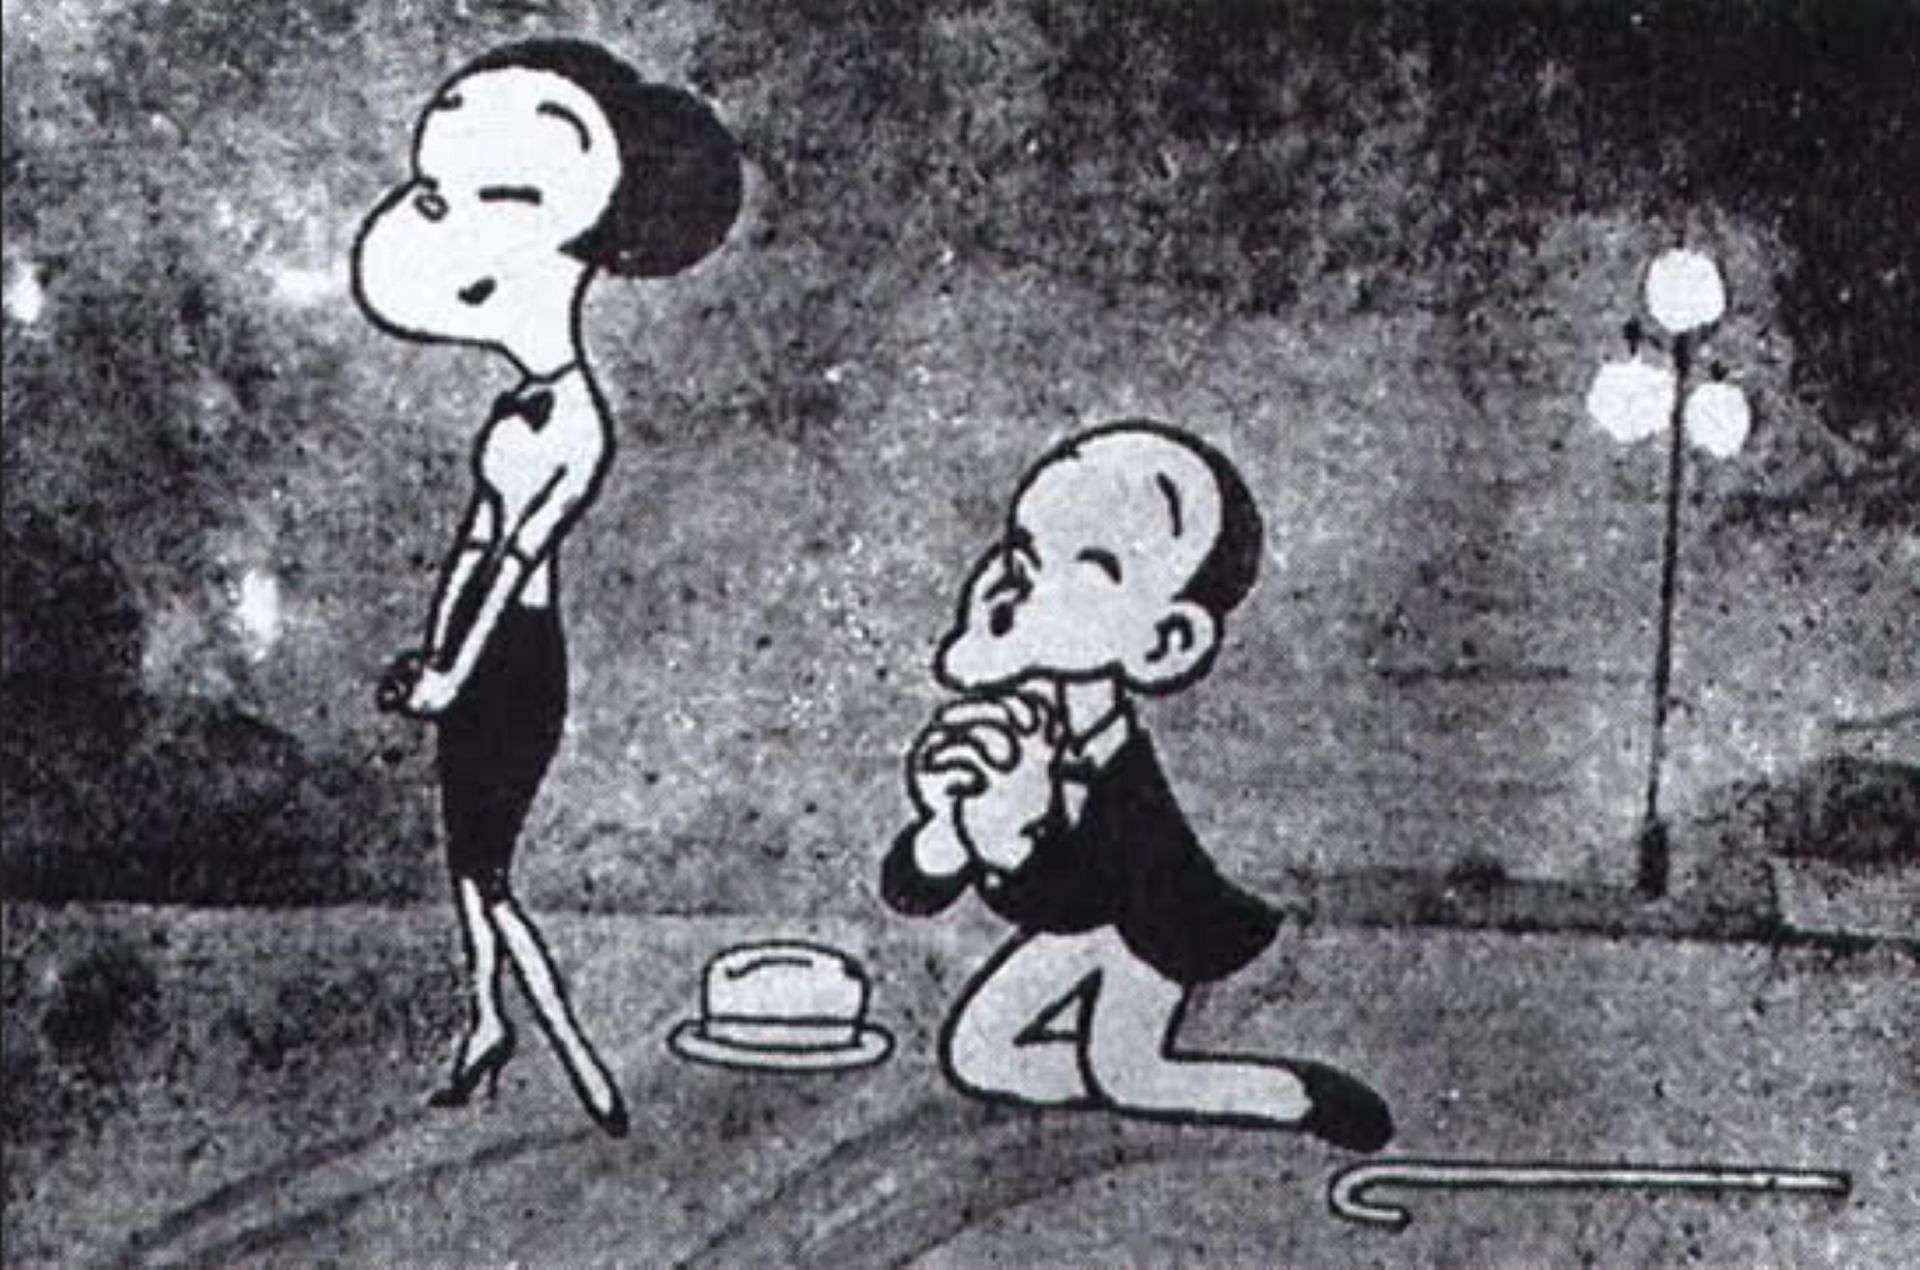 A single surviving still from the film (Image via Shochiku Companty, Limited)